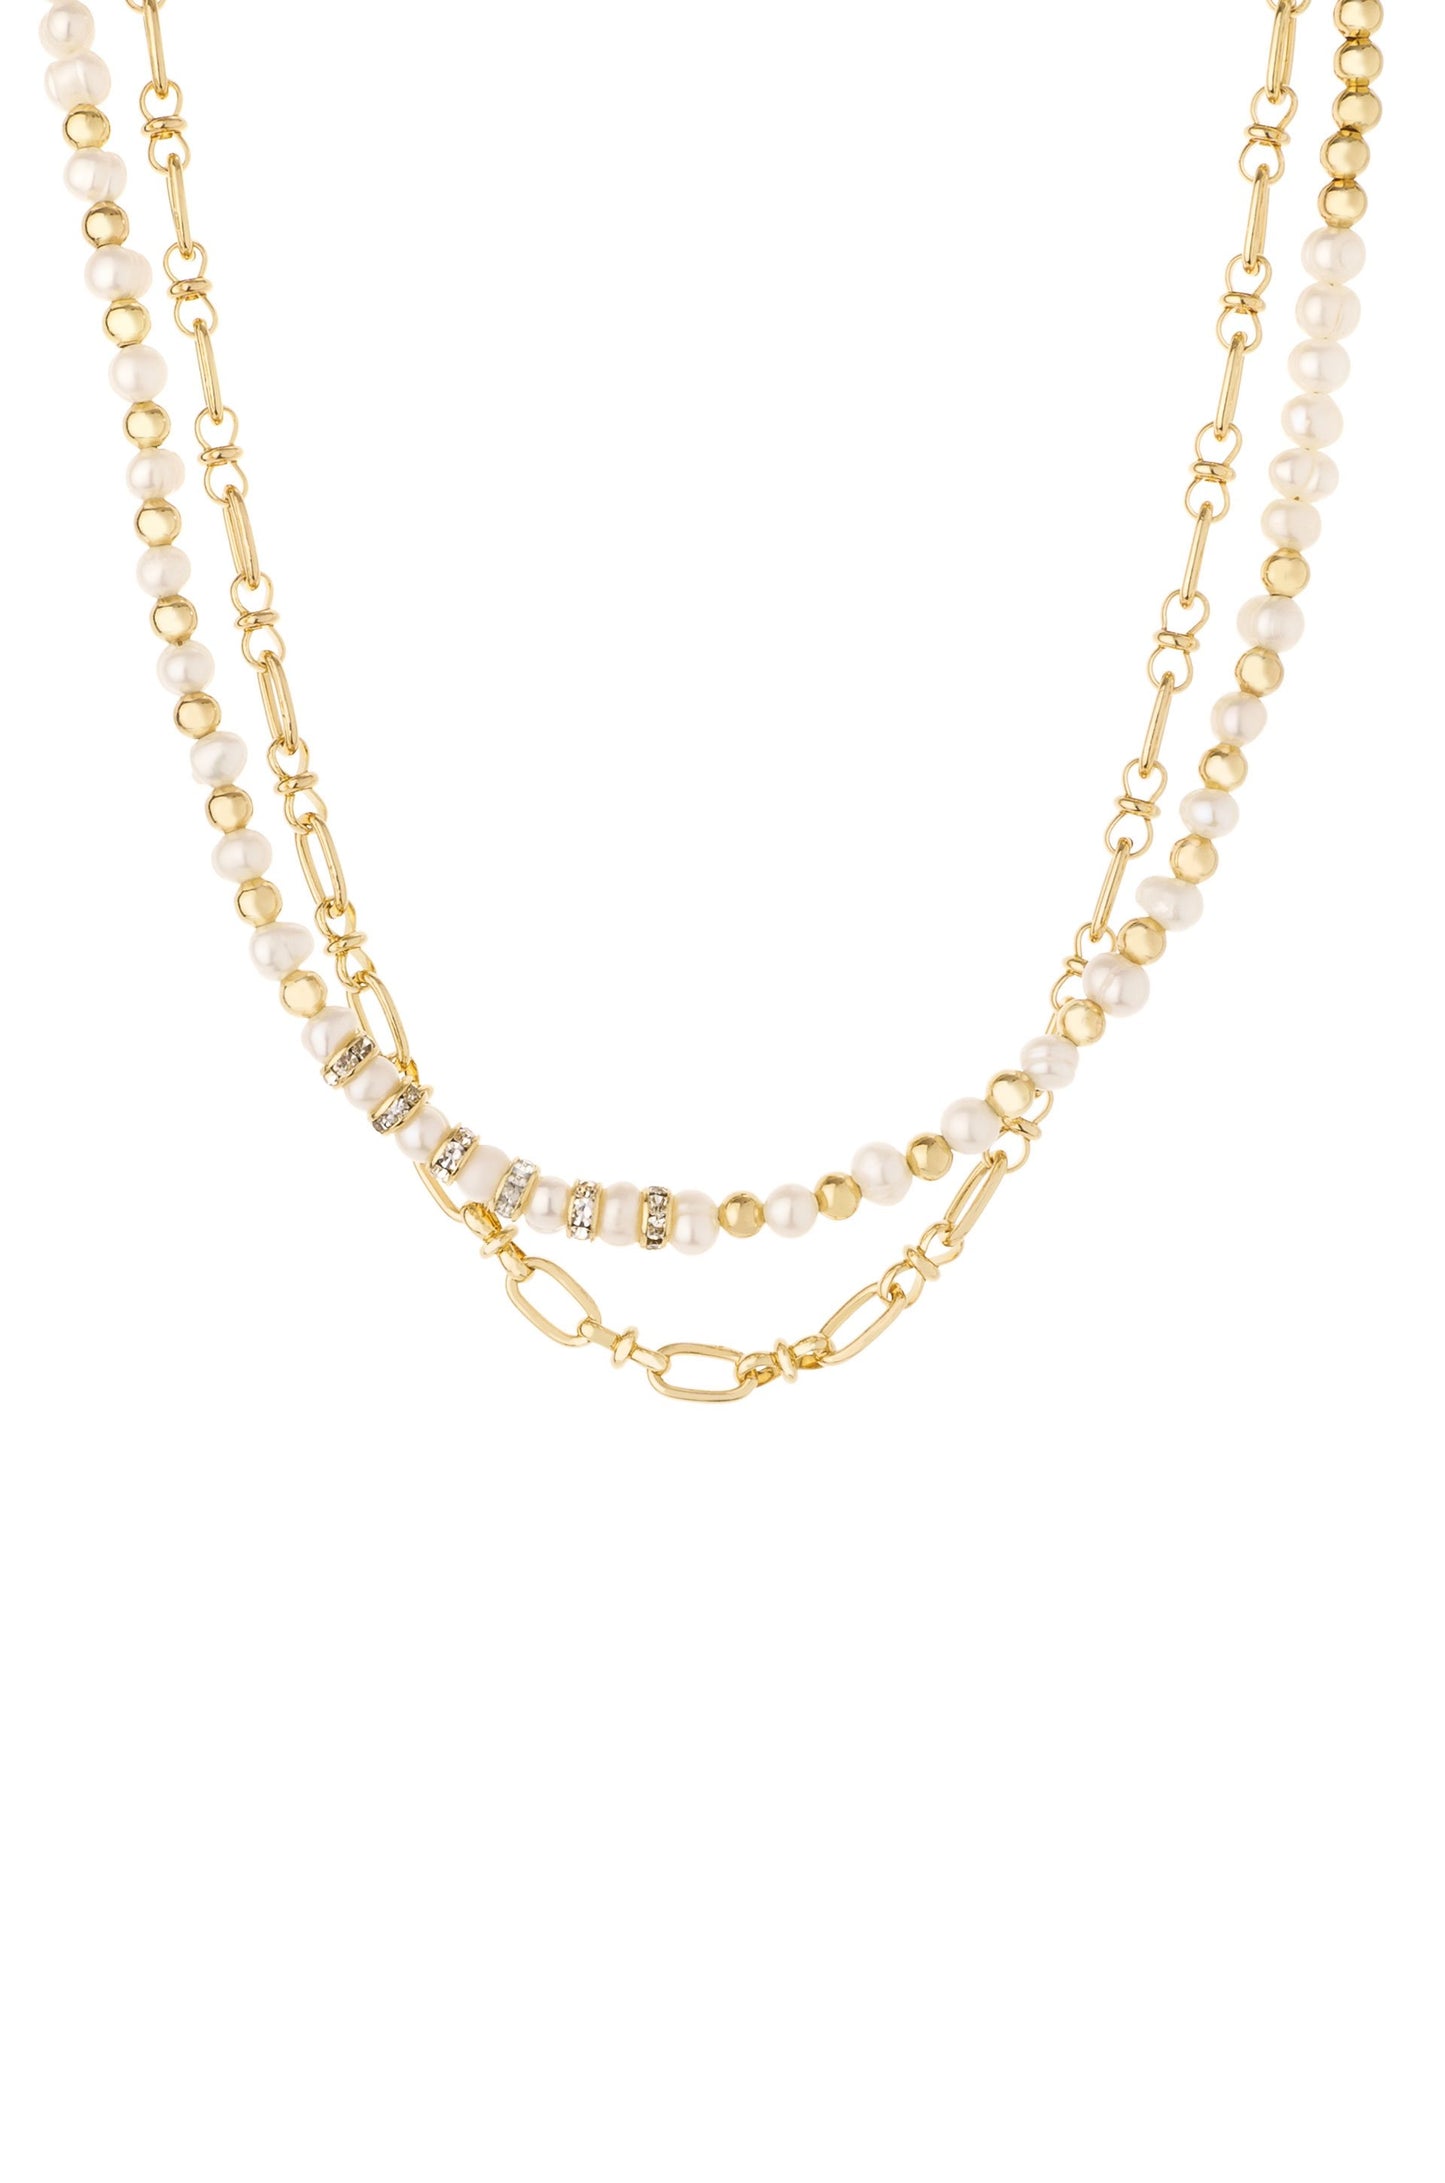 Pearl and Mini Links 18k Gold Plated Necklace Set on white background